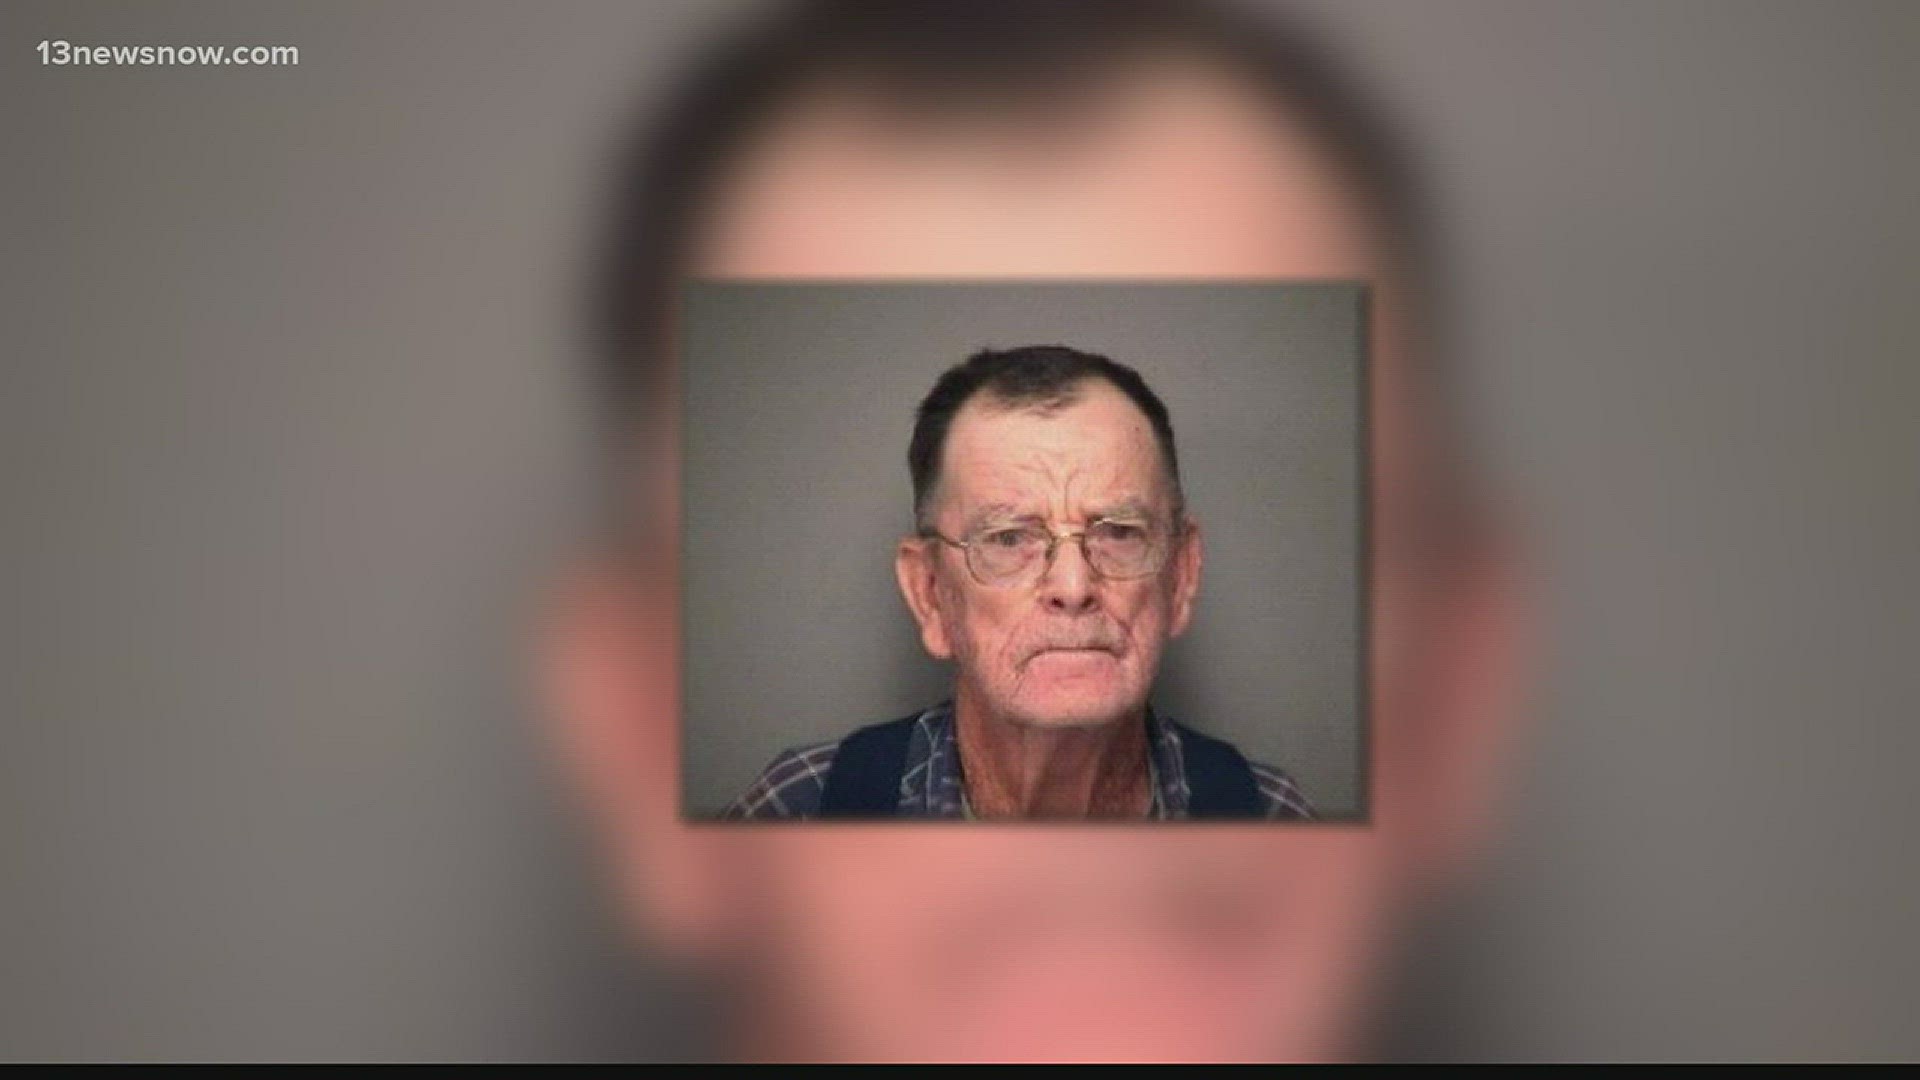 The Mathews County Sheriff's Office said the man lured an 8-year-old boy into his home and committed sex crimes against the child.